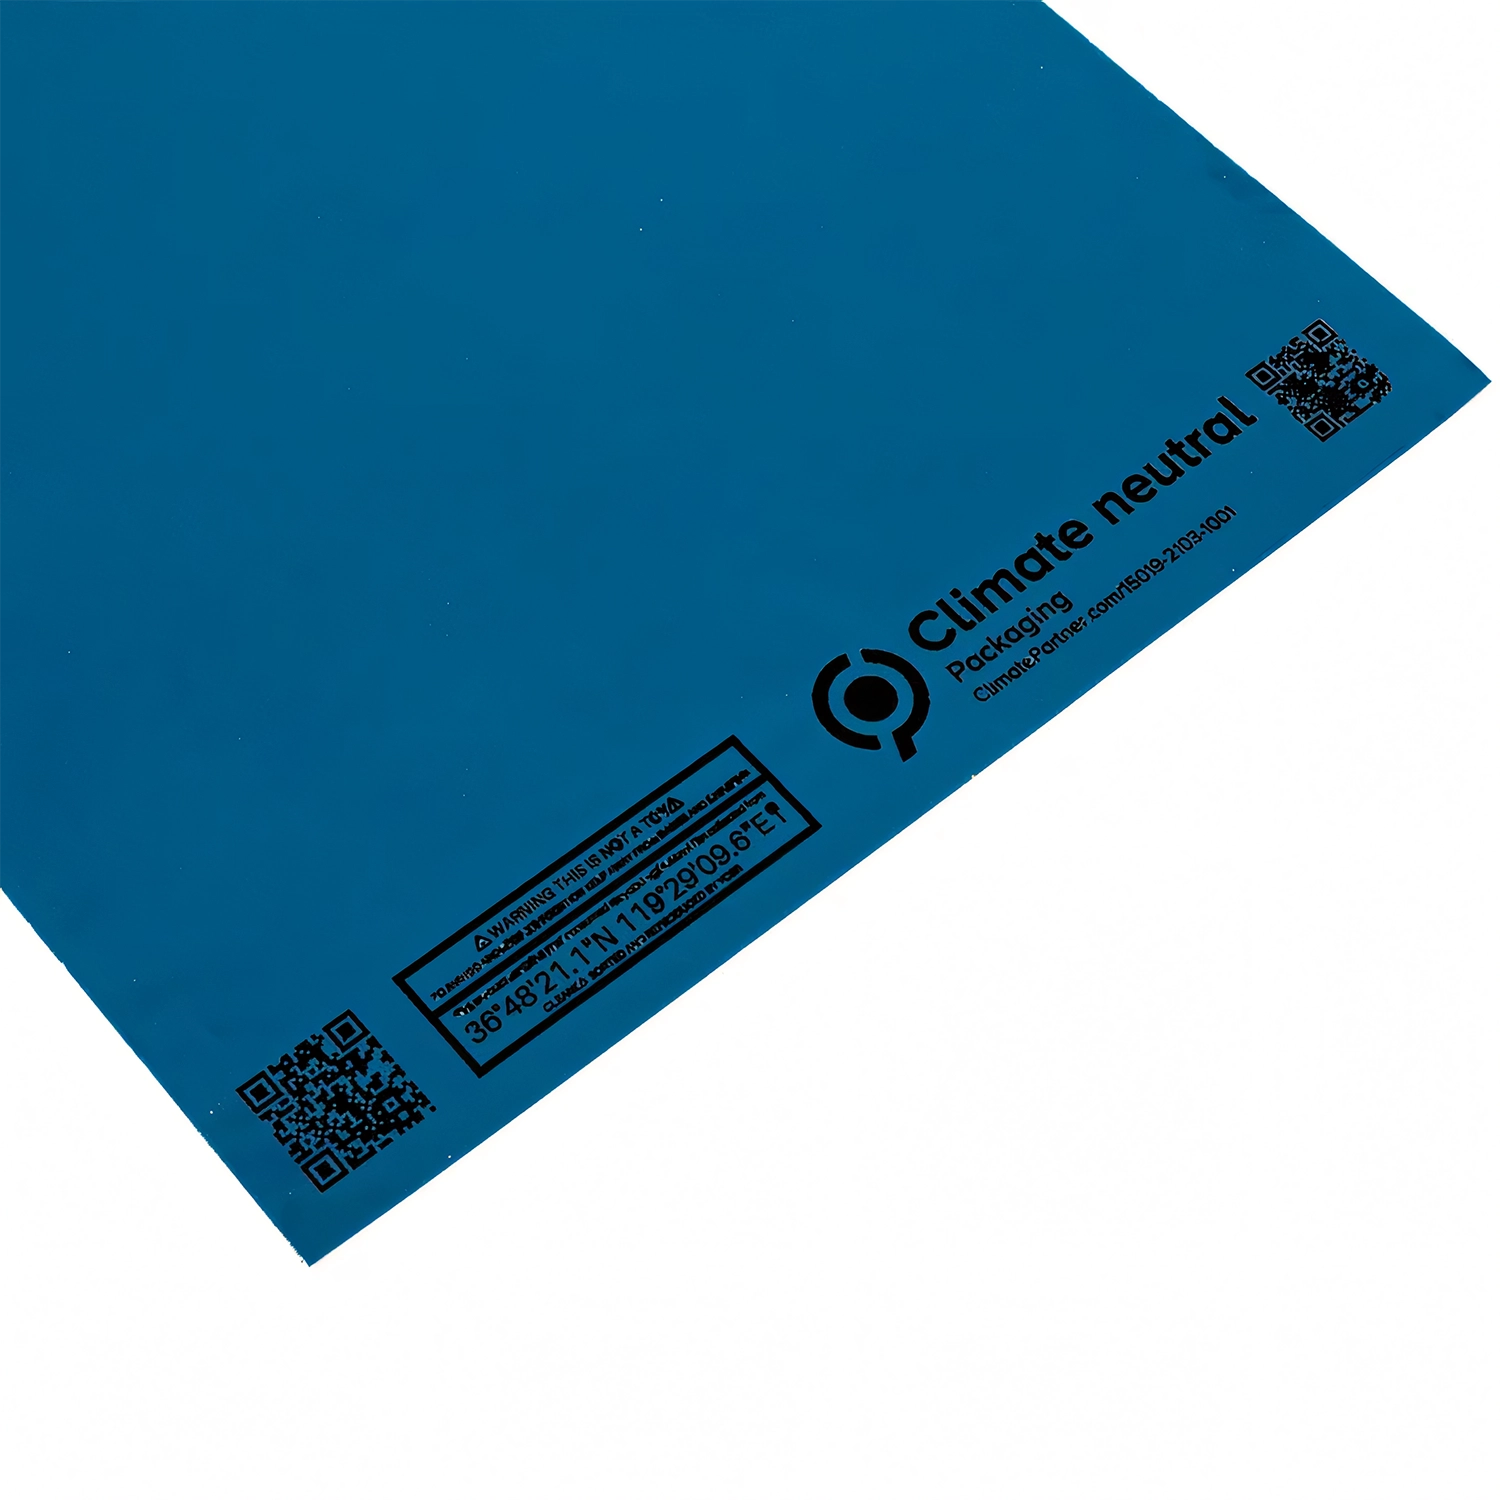 Blue Mailing Bags - Bags for Parcels 12x16 Inch